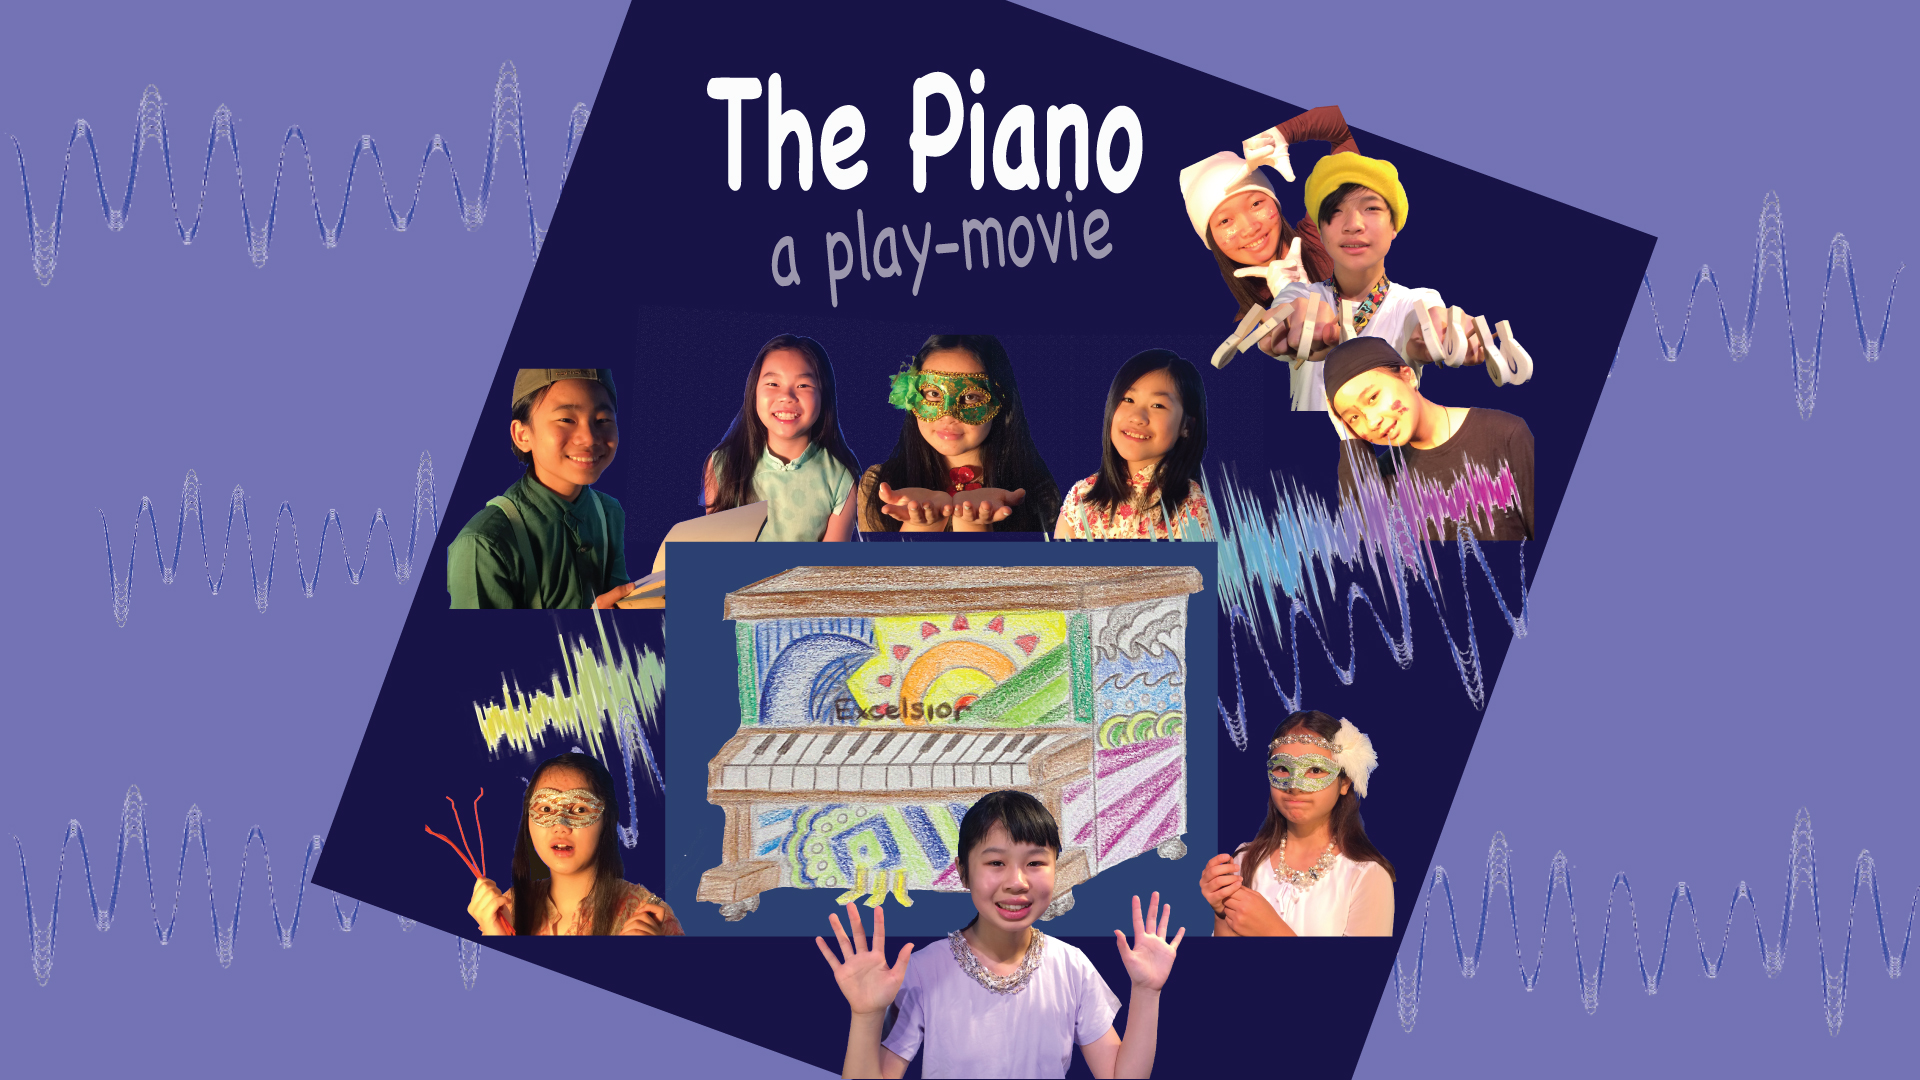 The Piano–a play-movie